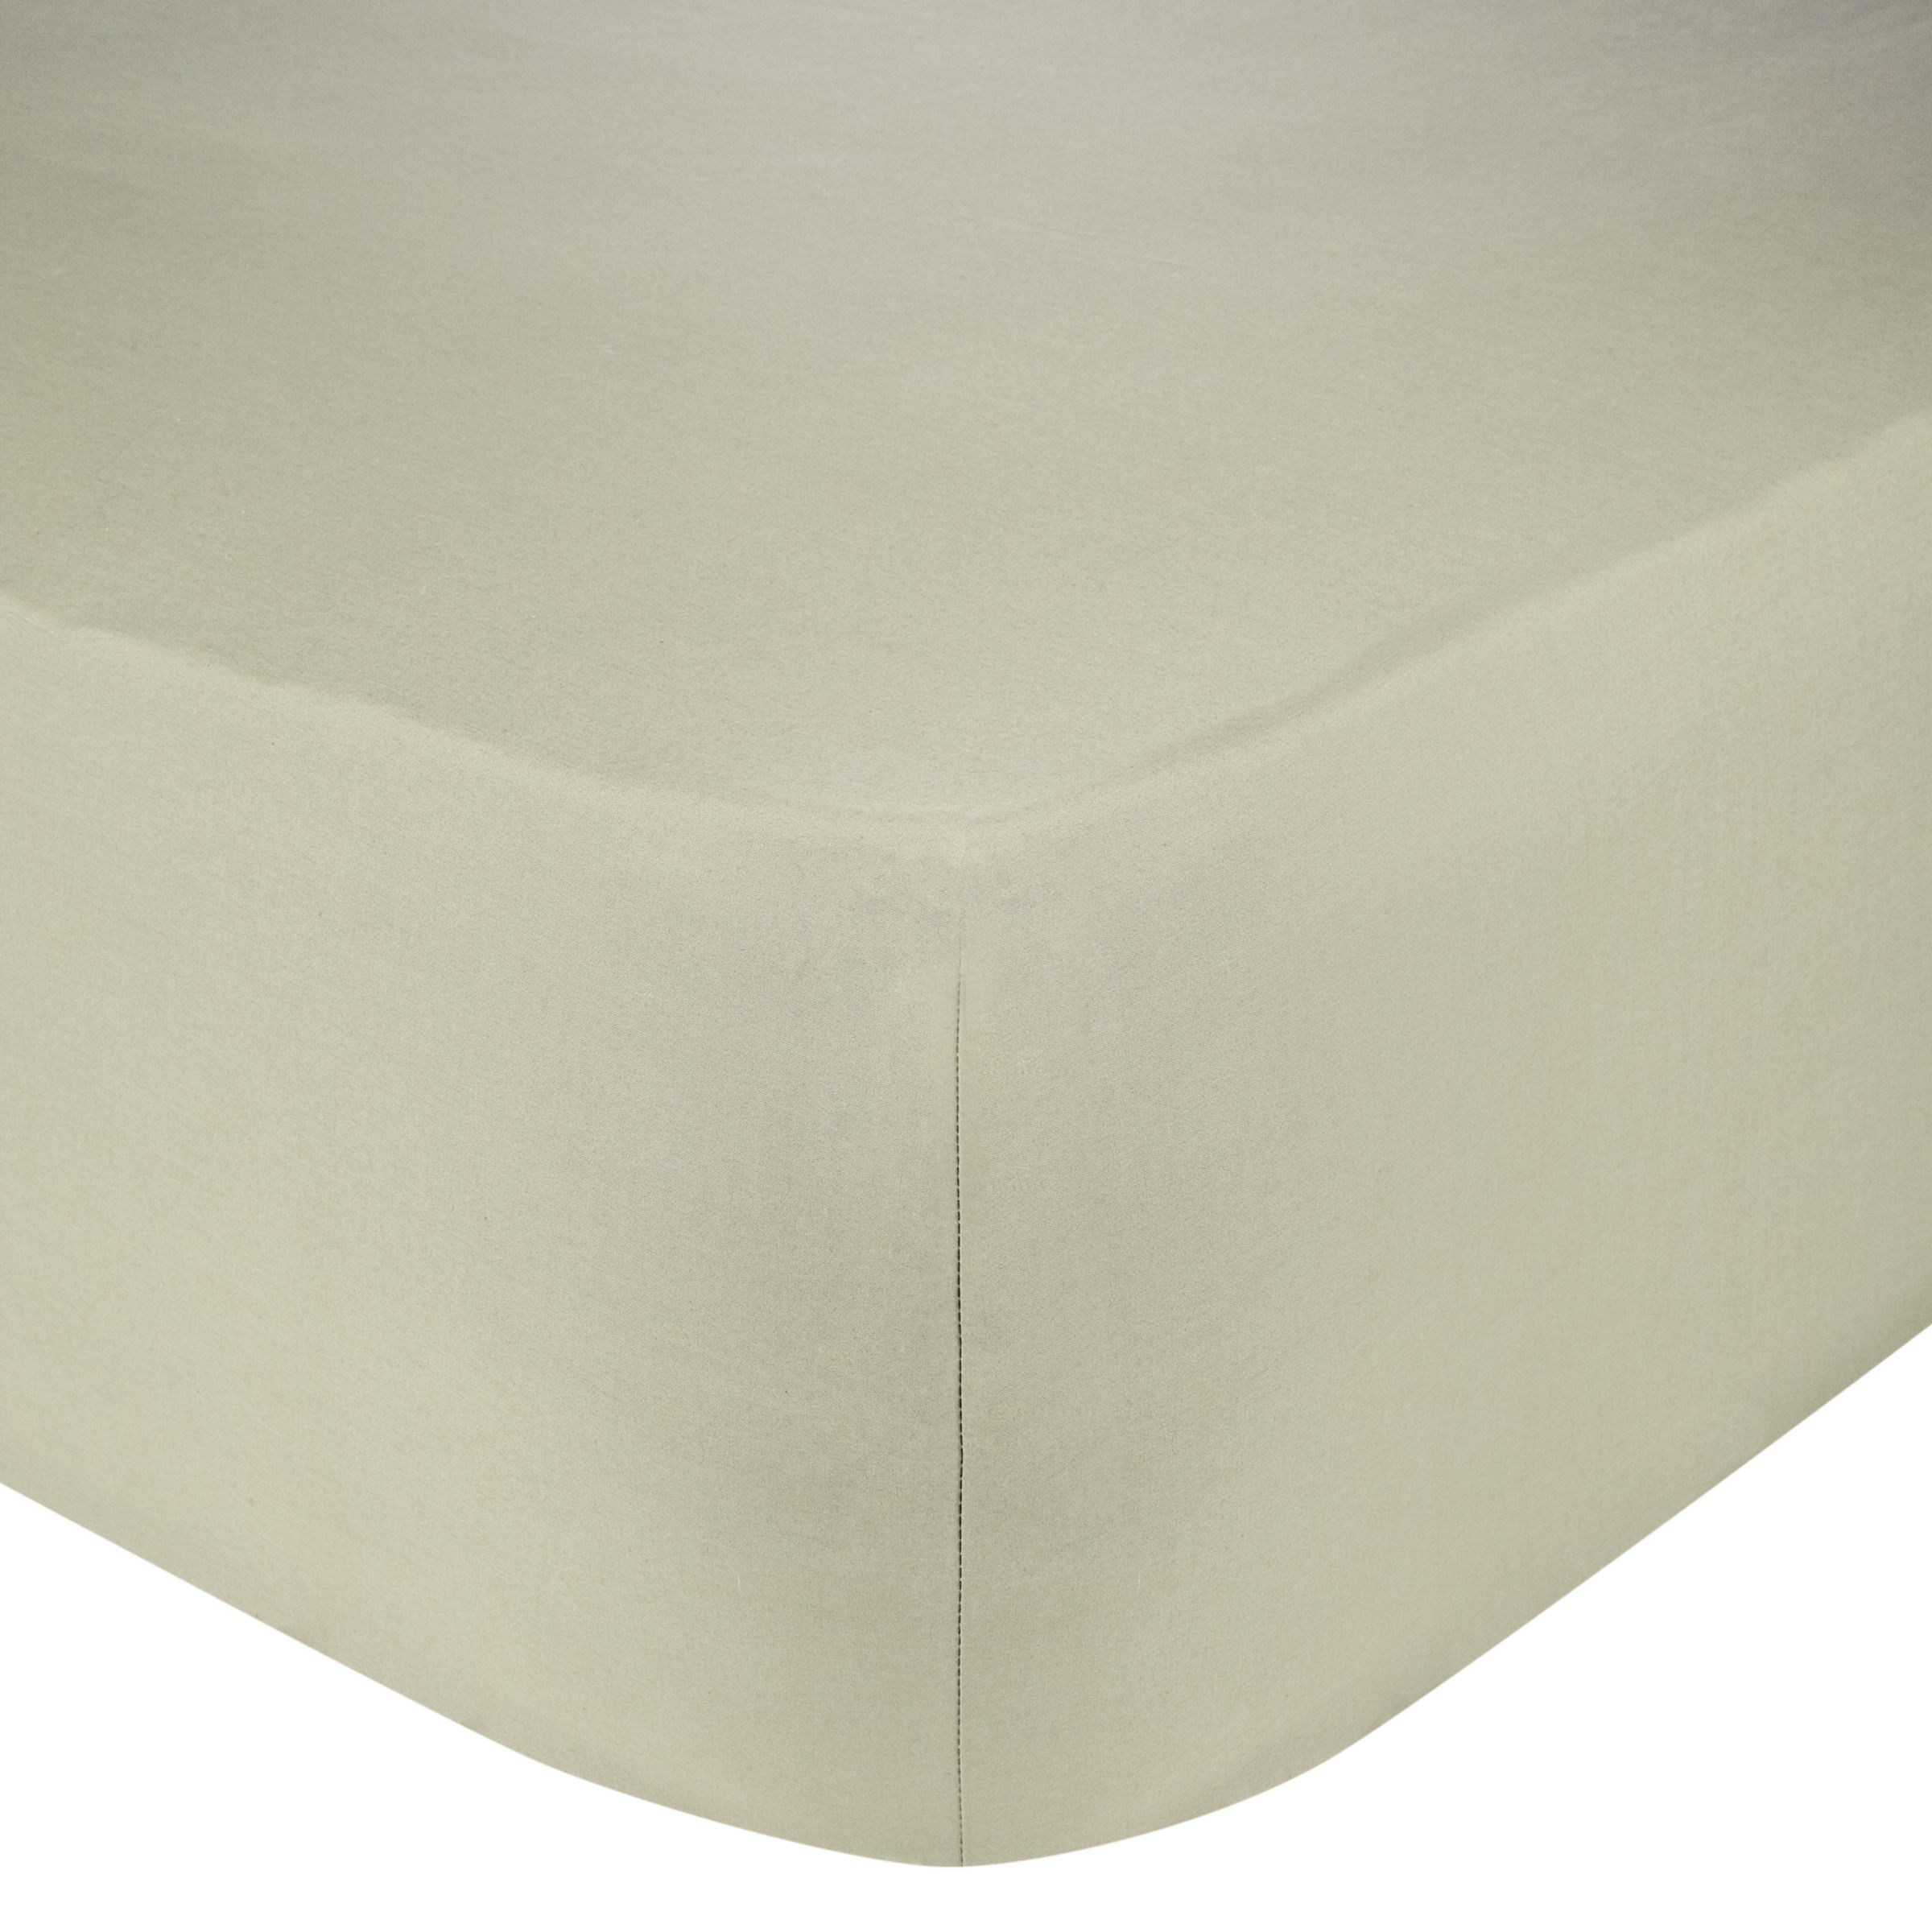 John Lewis & Partners Perfectly Smooth 200 Thread Count Egyptian Cotton Fitted Sheet, Mushroom, Double